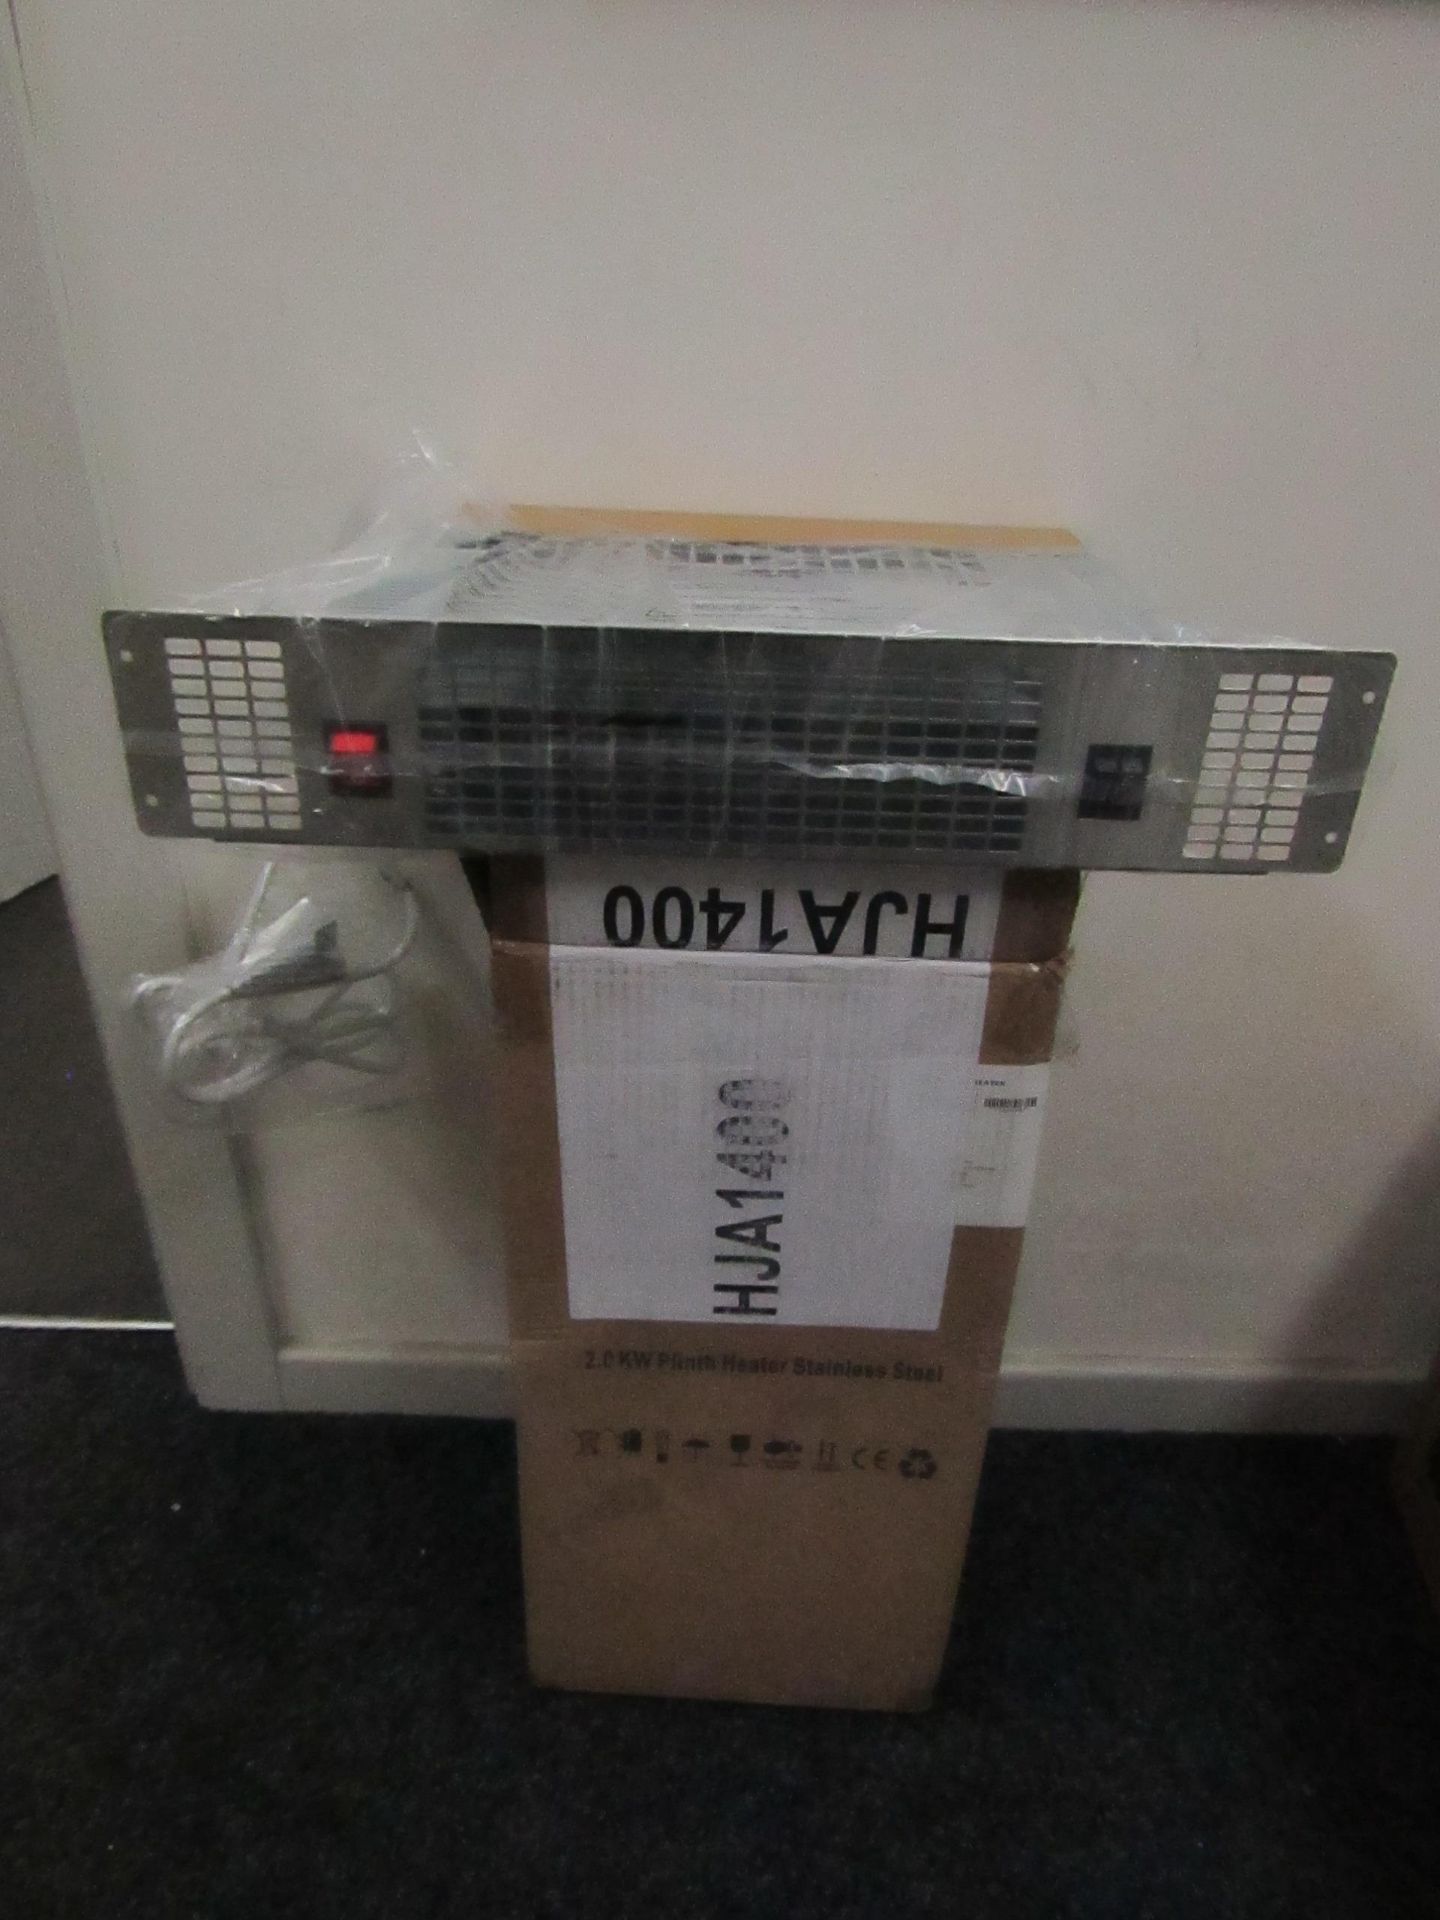 20x TCP UPH201SS PLINTH-MOUNTED FAN HEATER SILVER 2000W 500 X 100MM, new and boxed, Economic, - Image 3 of 3